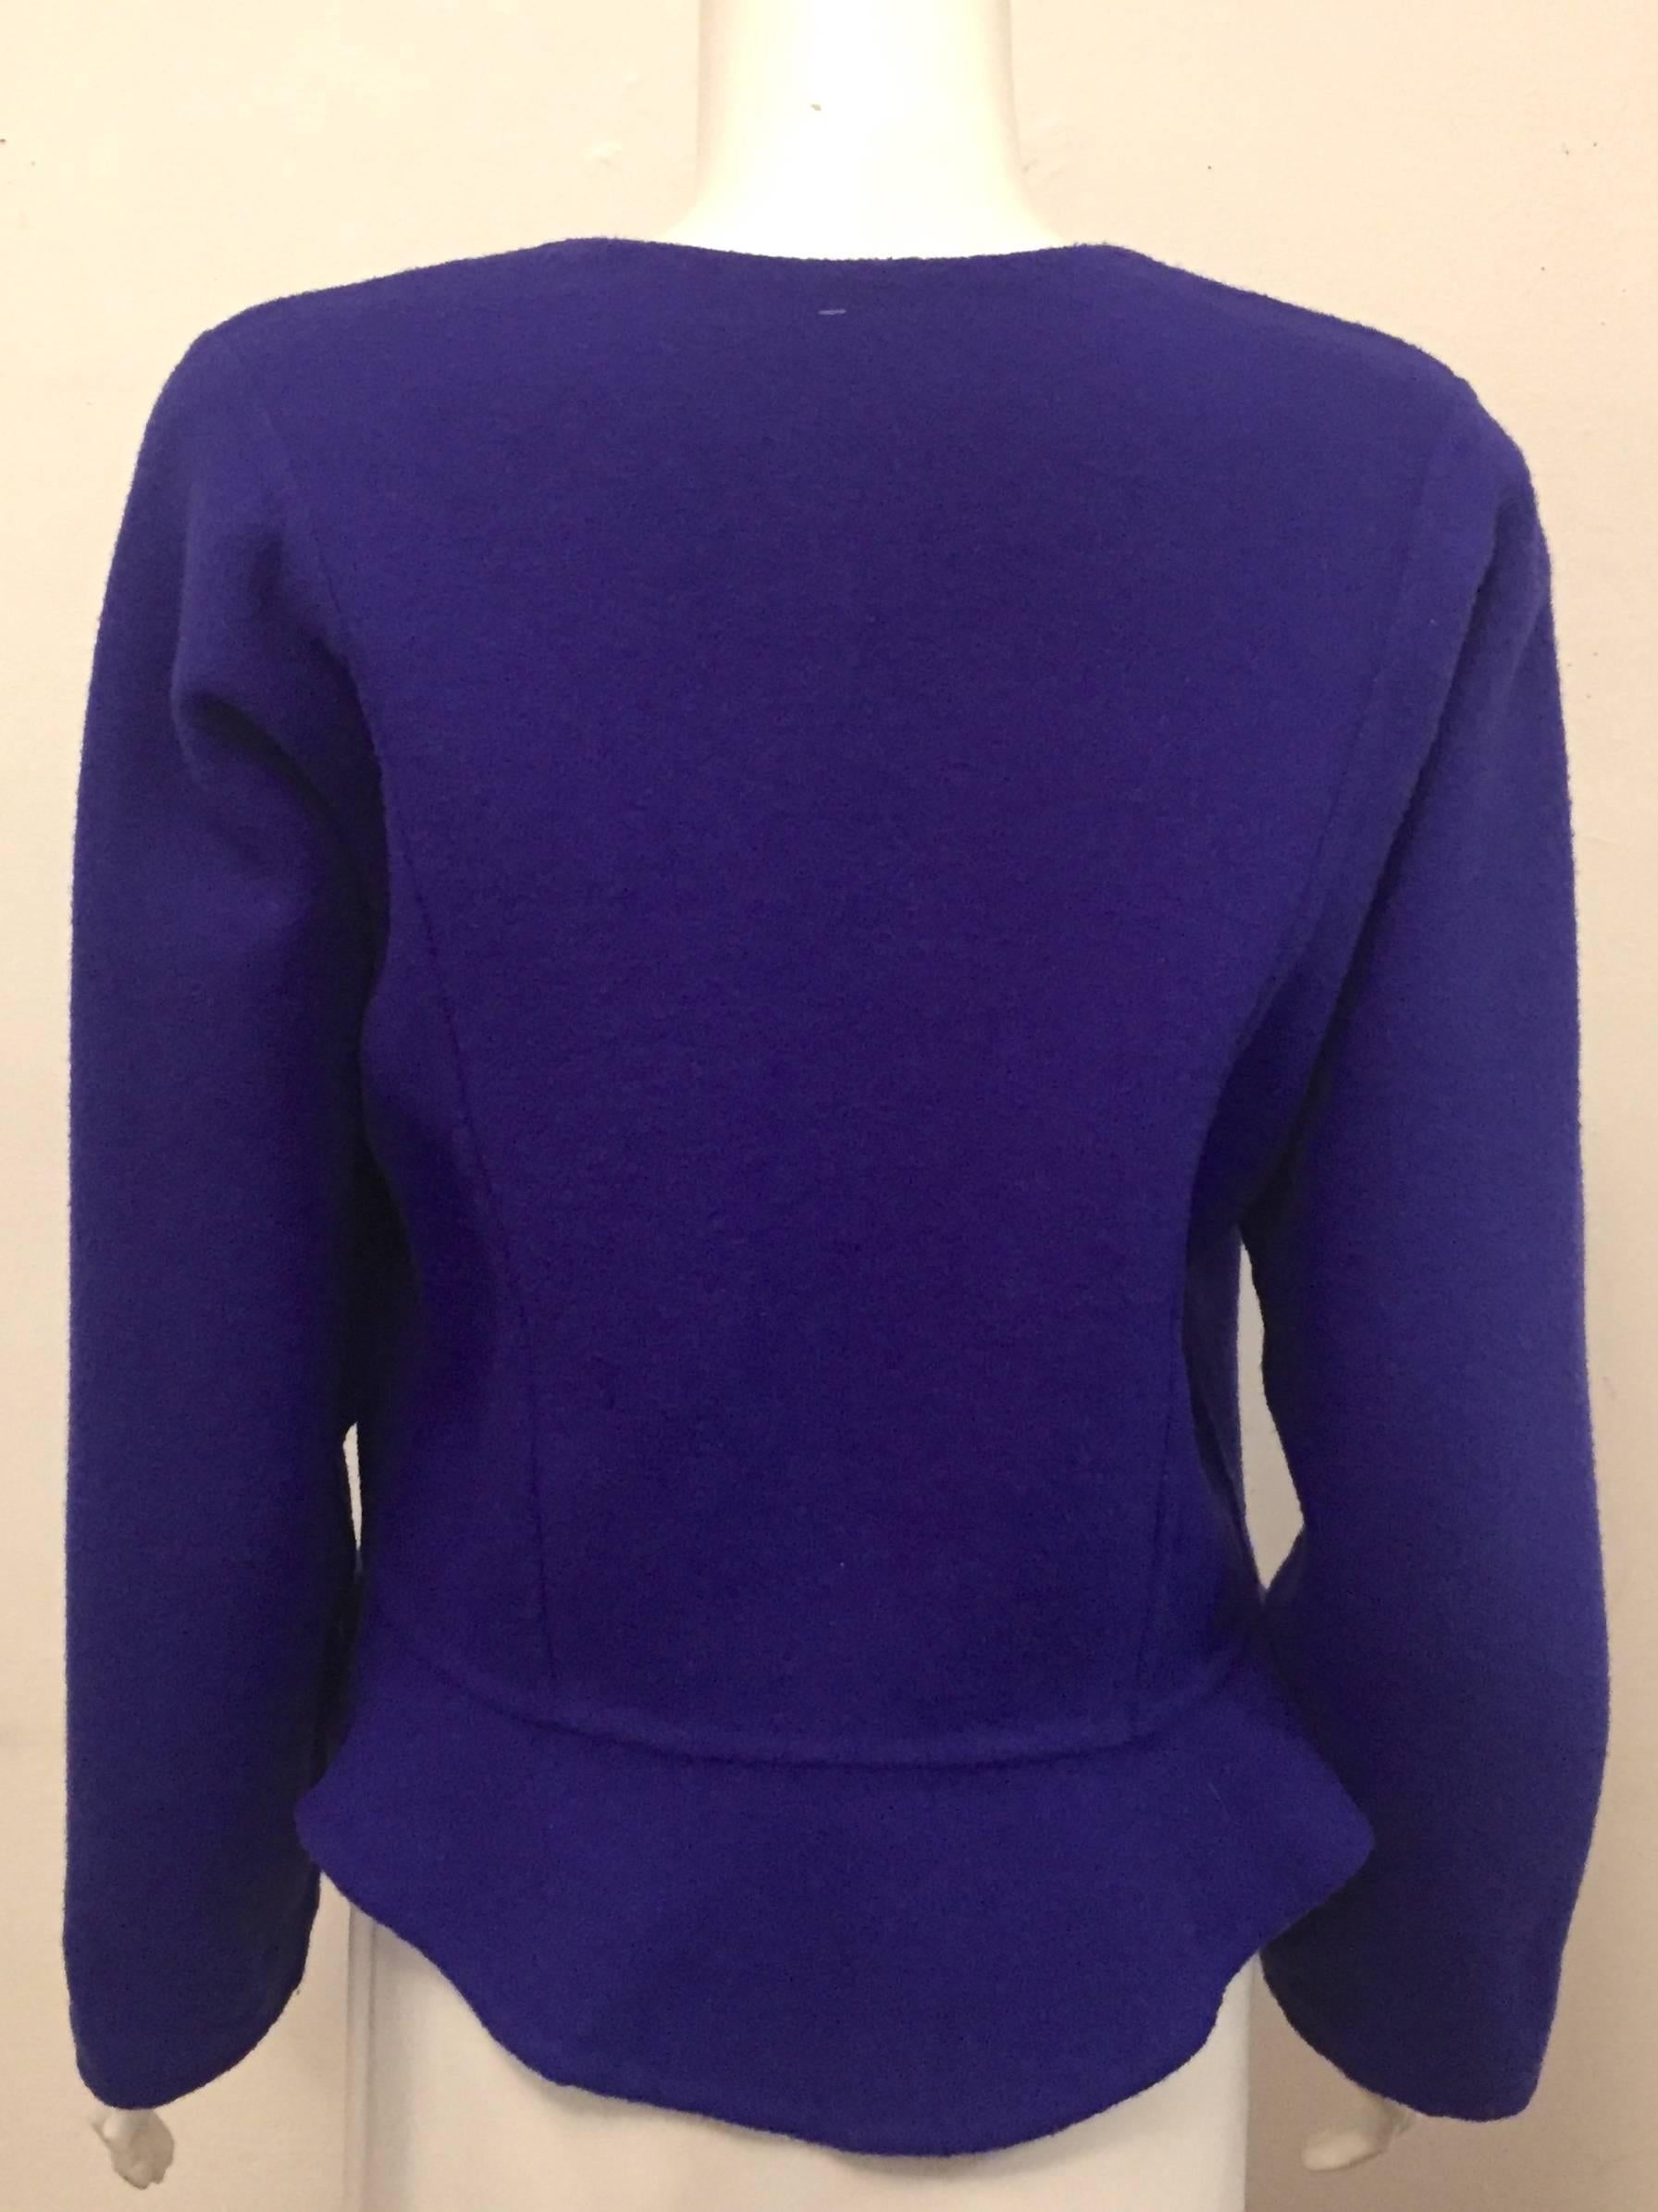 Genuine Geoffrey Beene Royal Blue Jacket with Dolman Sleeves In Excellent Condition For Sale In Palm Beach, FL